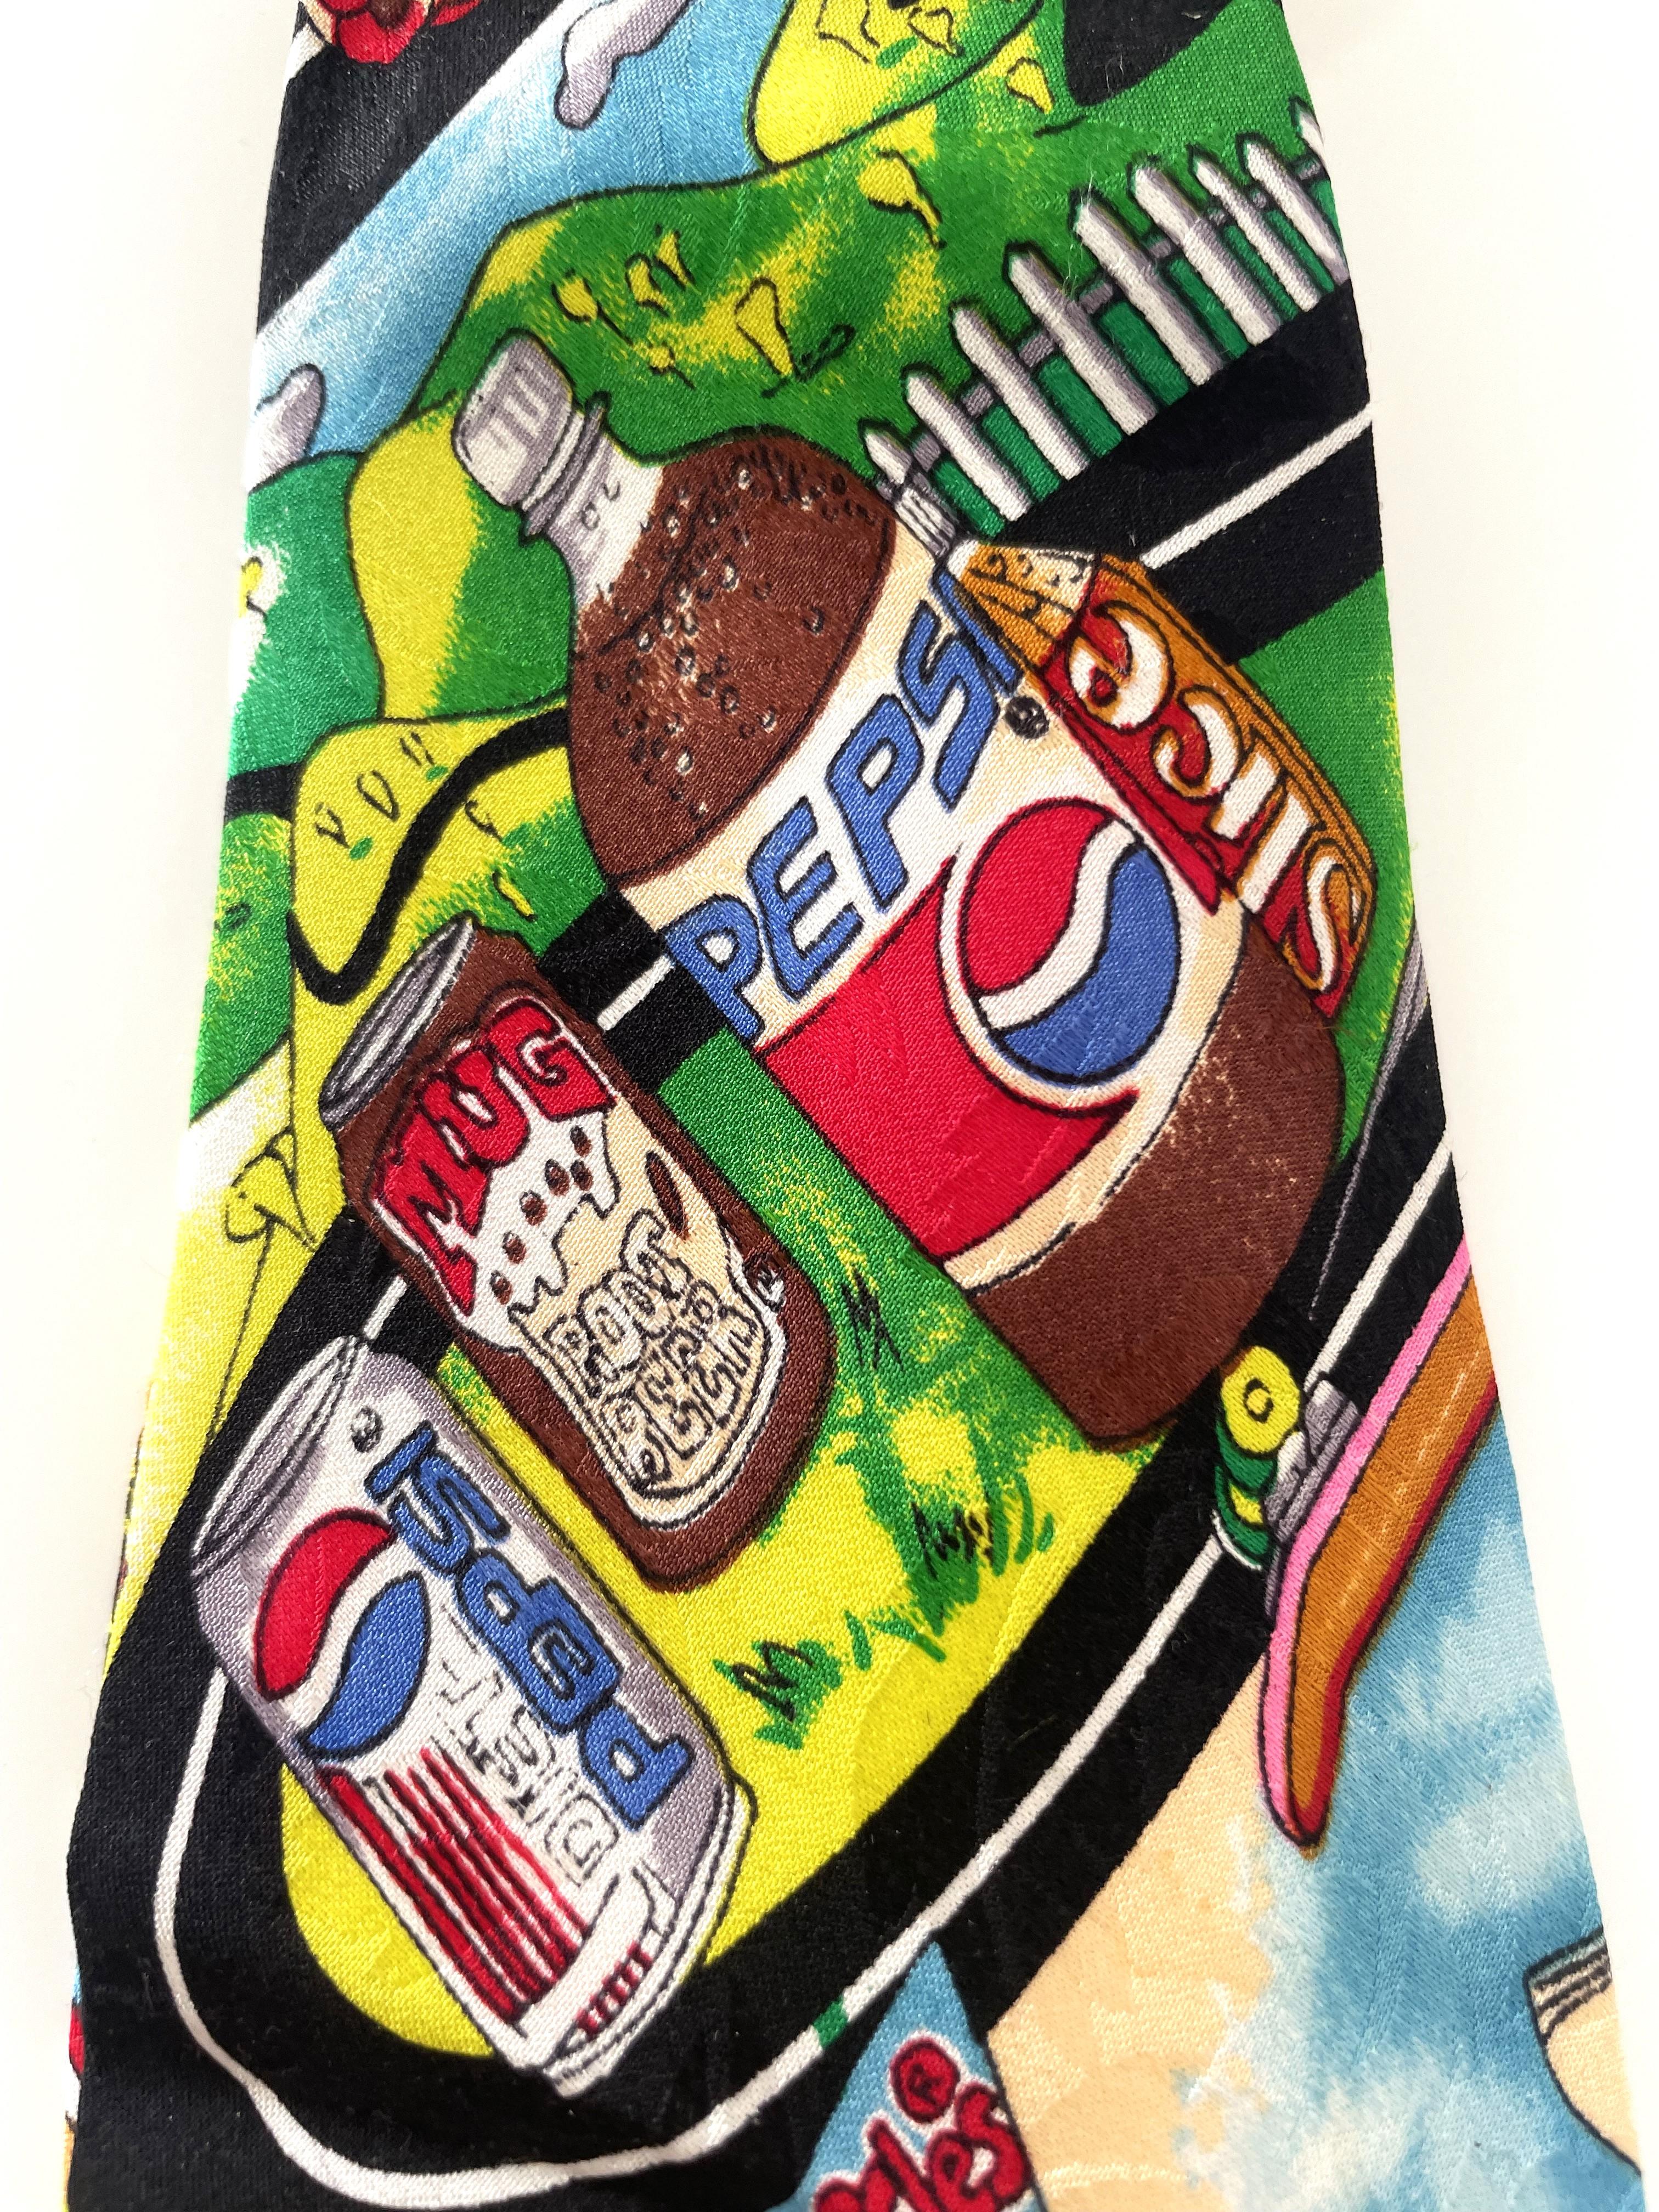 This is a Special Designed Limited Edition Silk Tie by Nicole Miller. Collectors item. A brand-new, unused, and unworn limited edition item with a signed tag. Nicole Miller is a well-known American fashion designer, primarily known for her women's